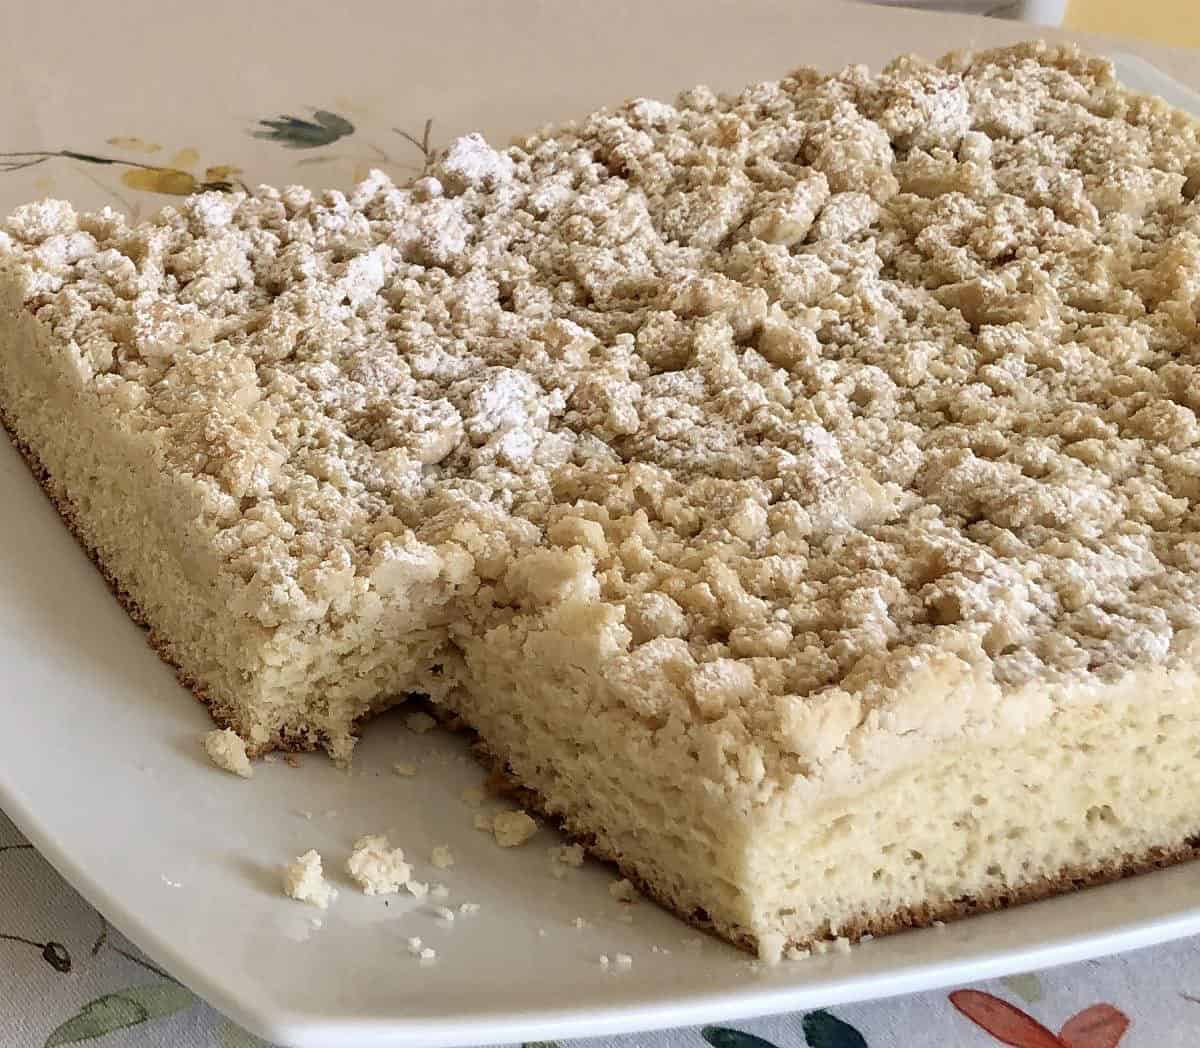  Dive into the buttery flavors with every bite of the Krum Kuchen